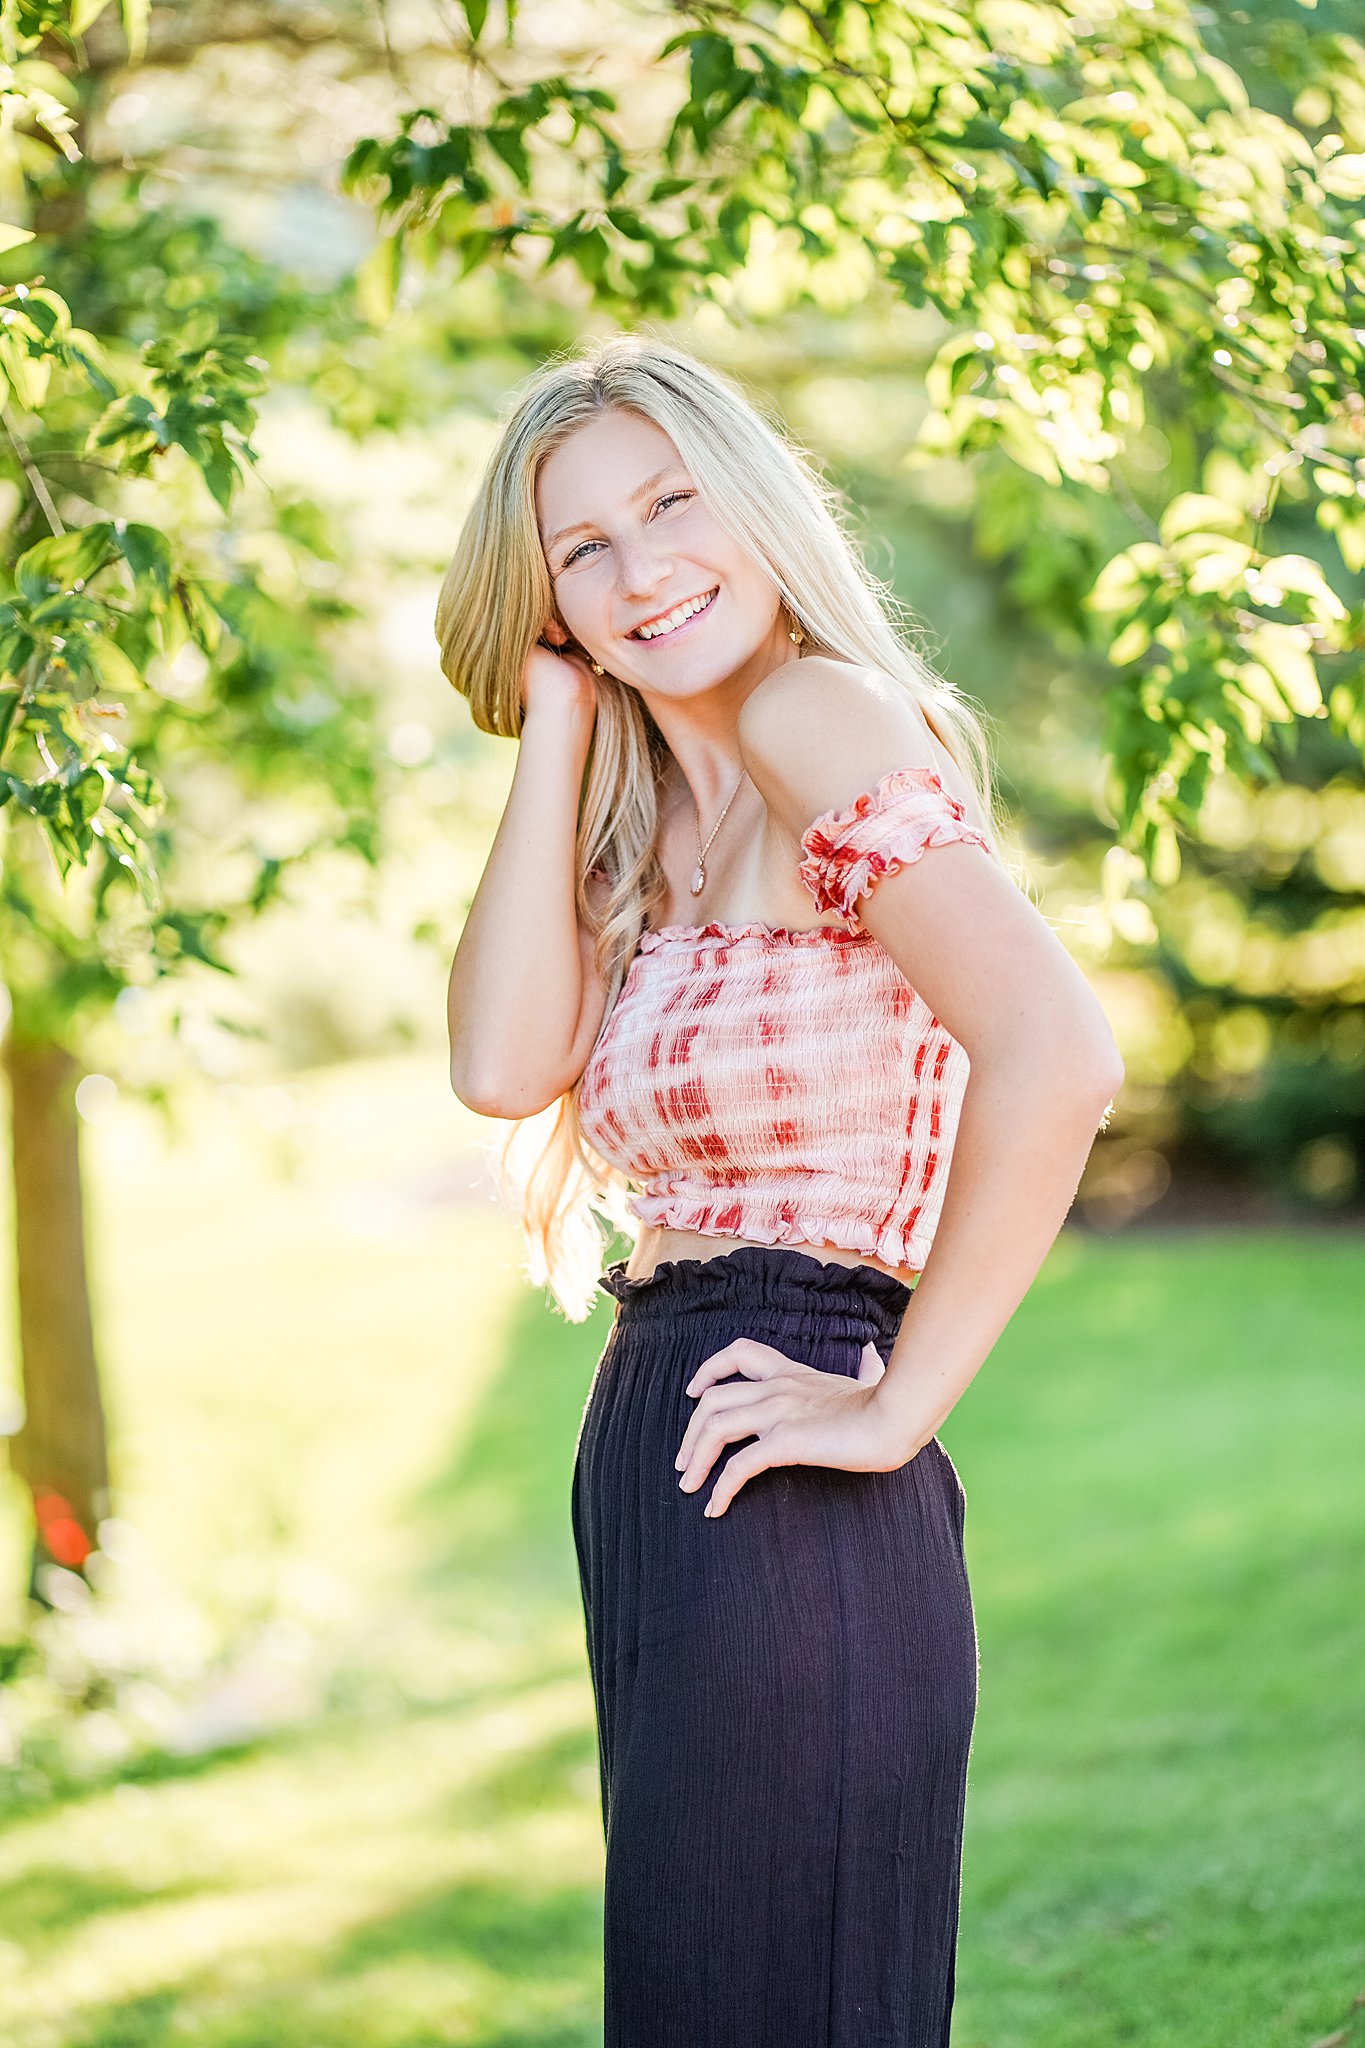 High school senior stand in a green yard with hand on her hip